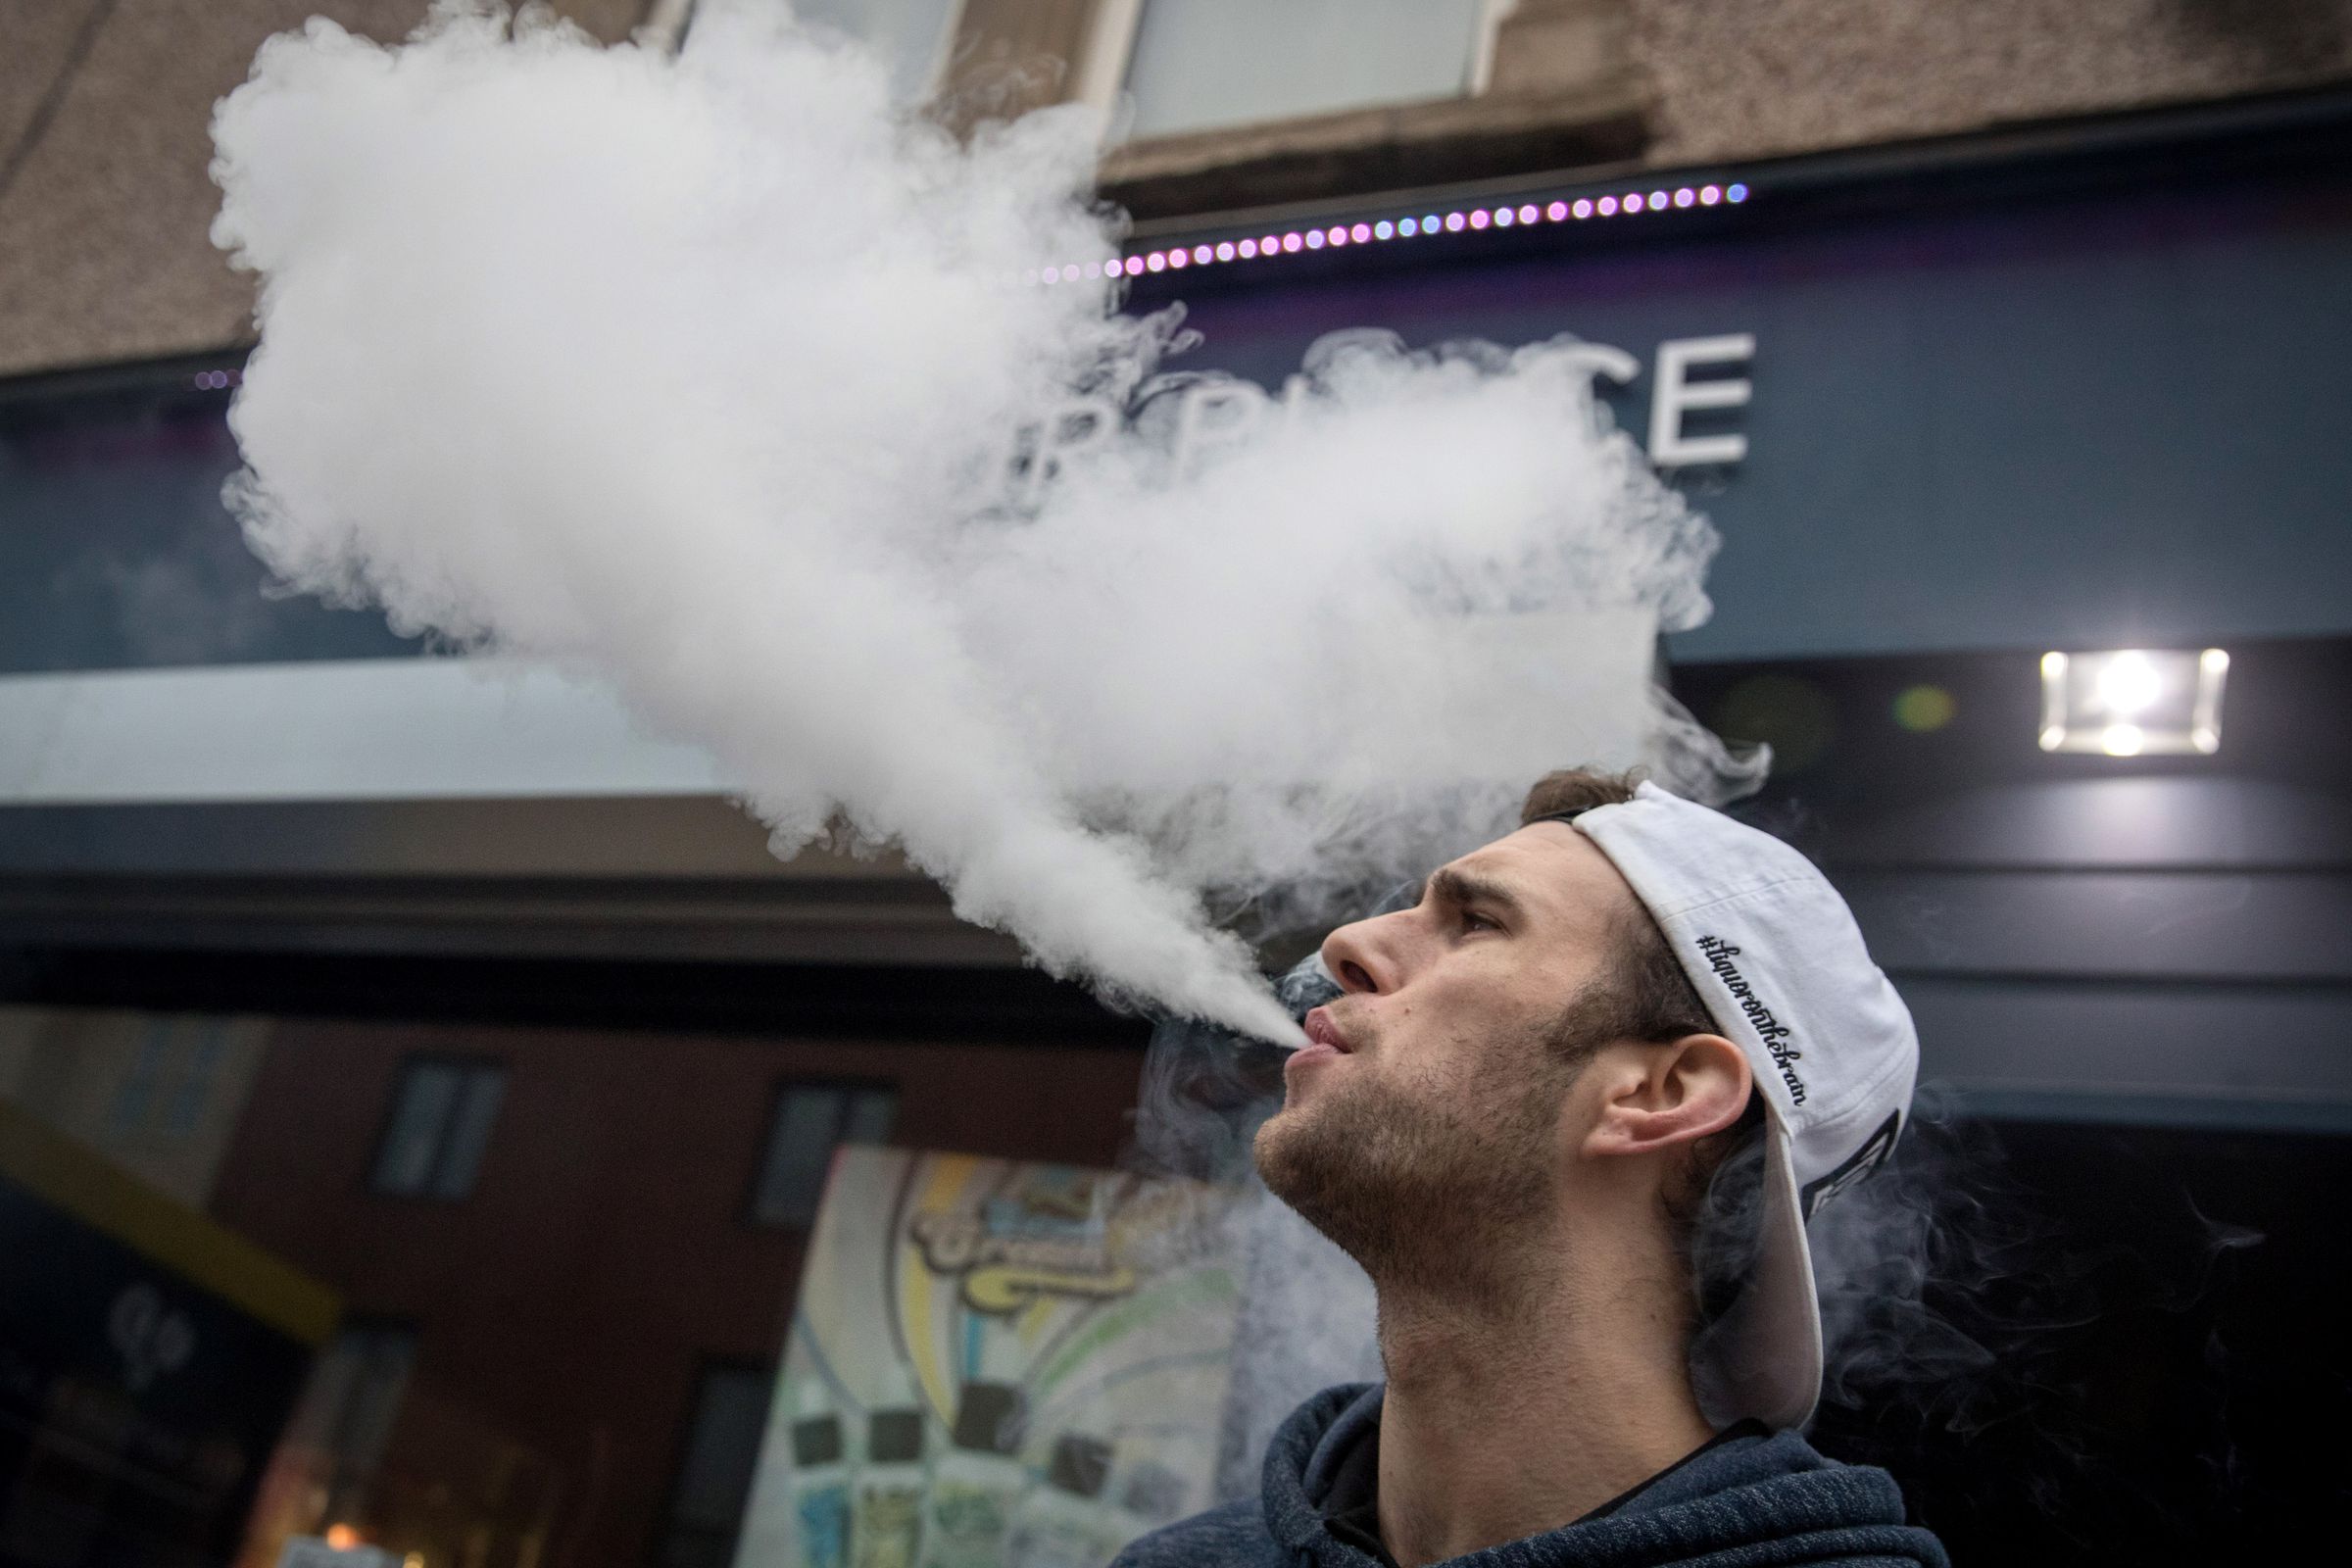 Vaping Shops Increase In Popularity Across The UK